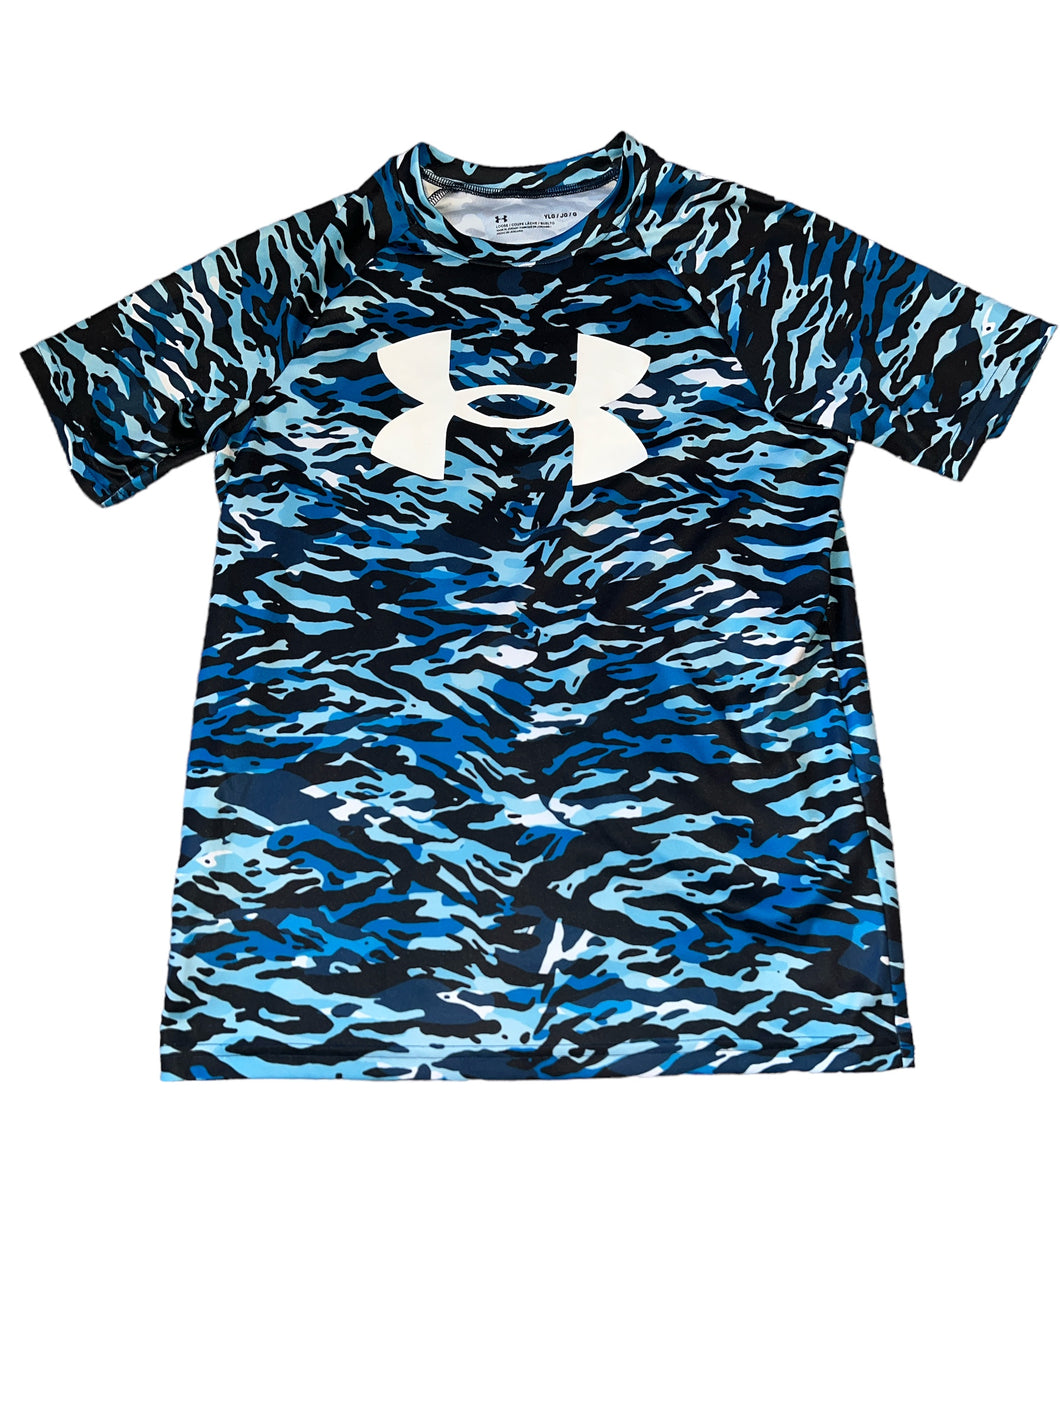 Under Armour boys camo wave active tee Youth L(14-16)